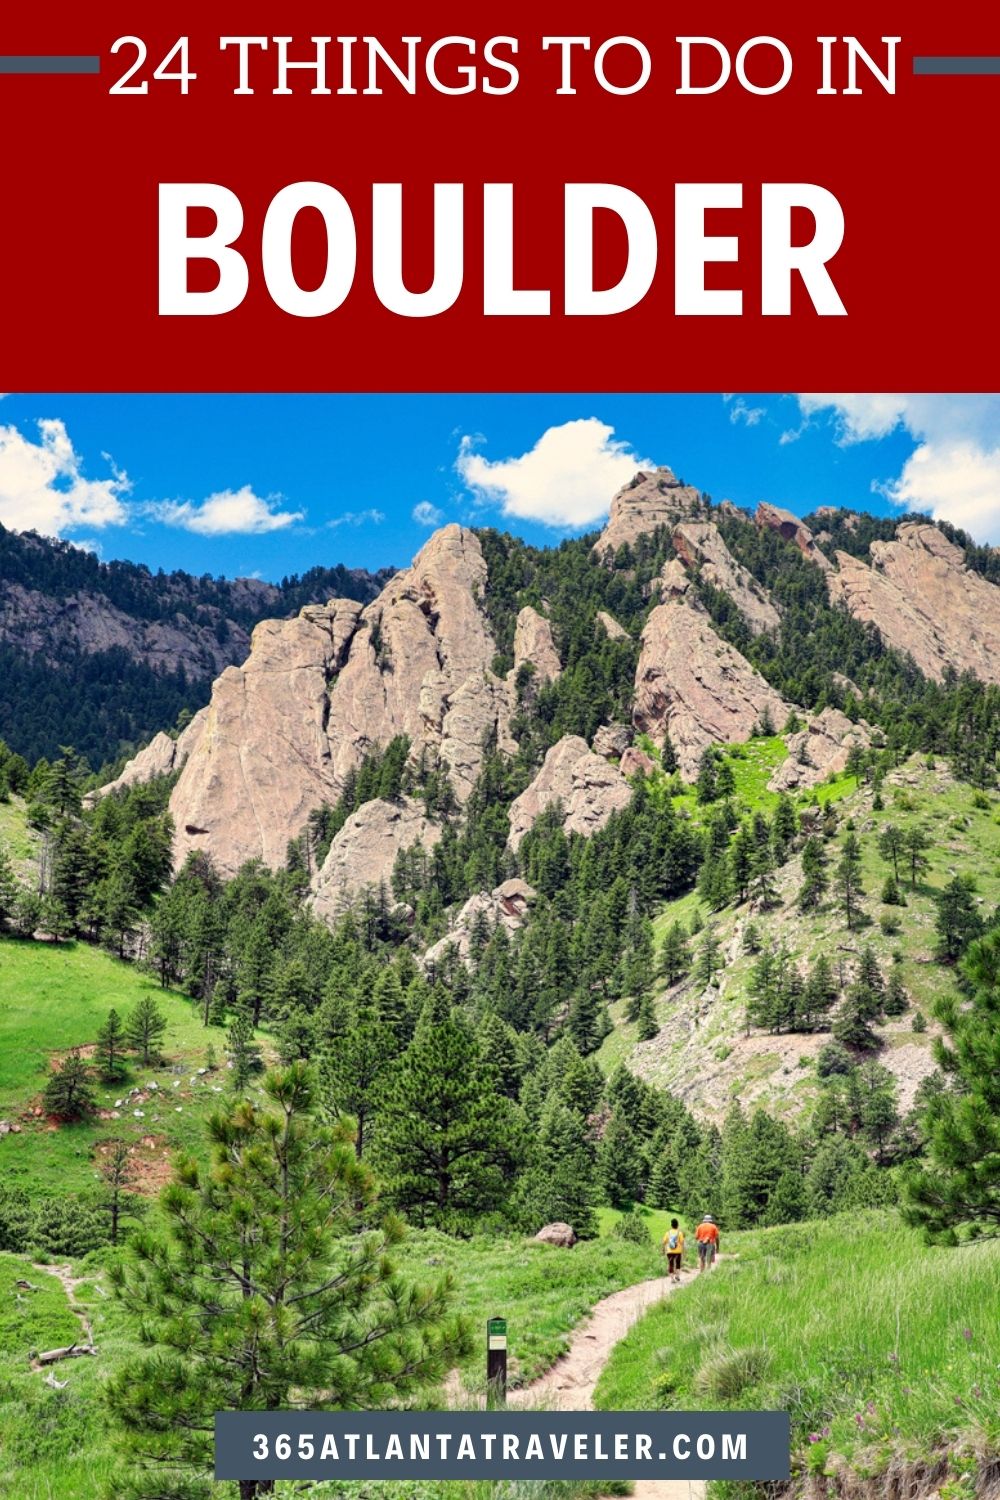 24 OUTSTANDING THINGS TO DO IN BOULDER, COLORADO